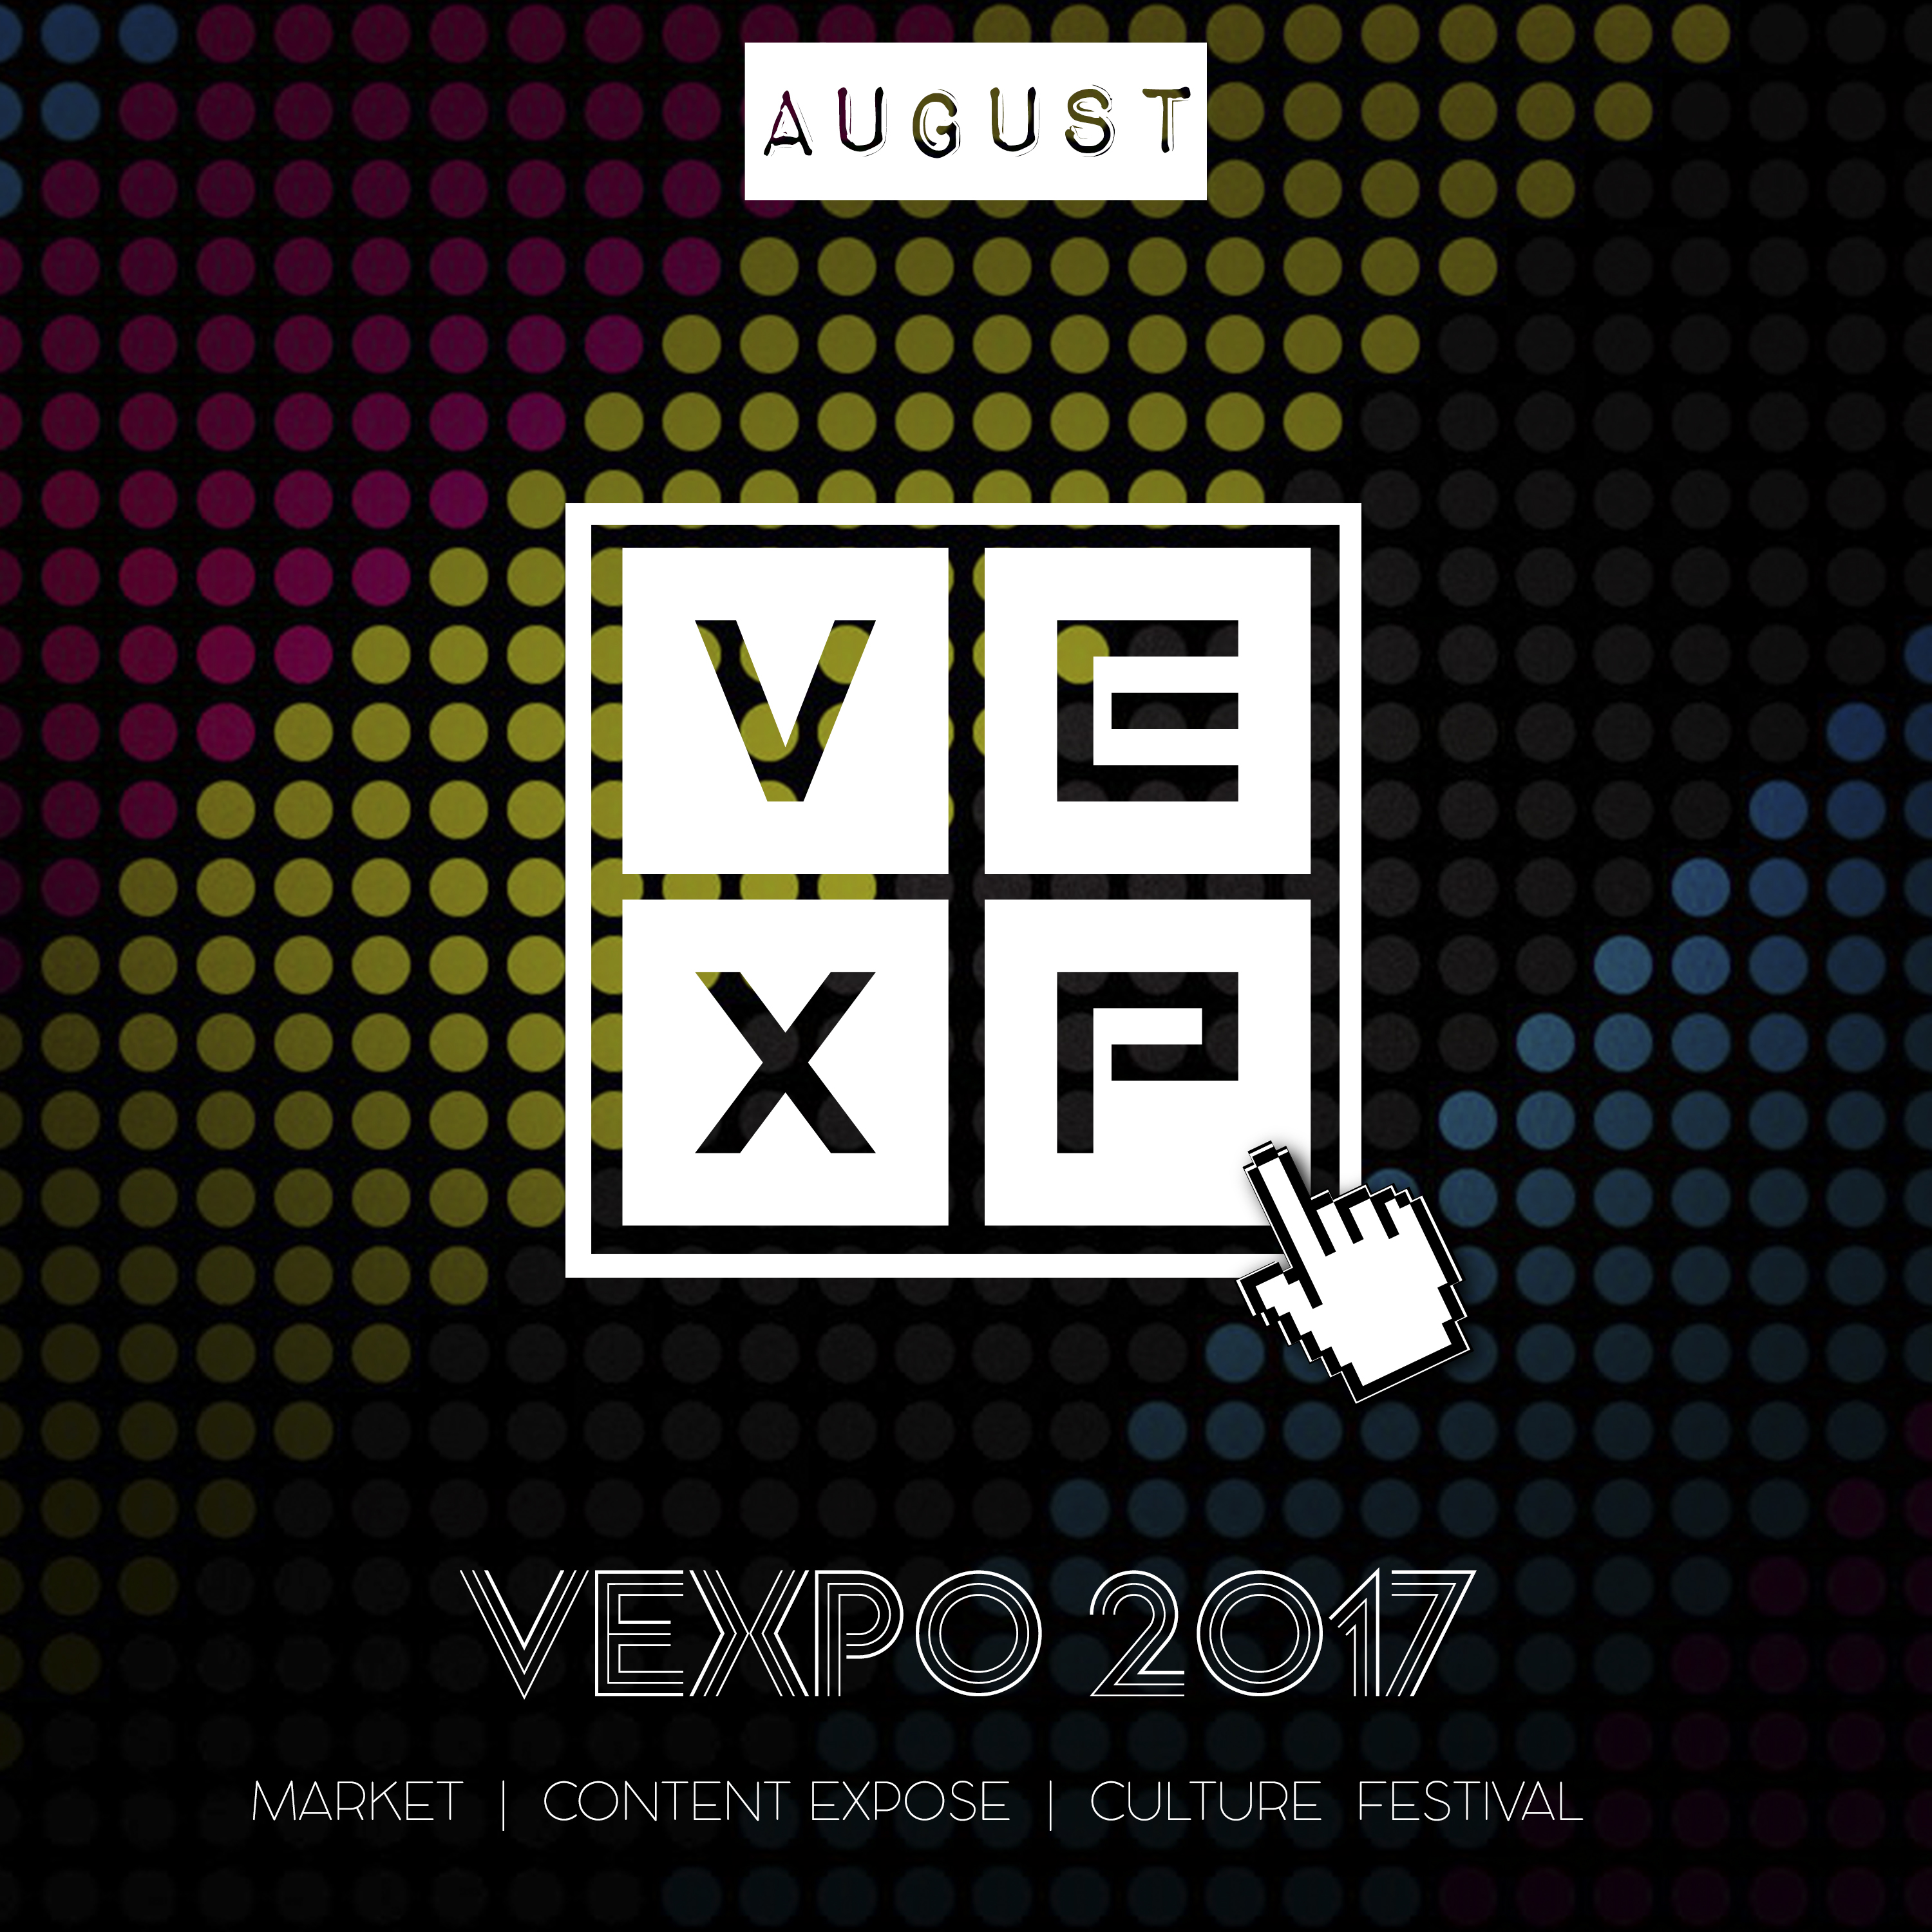 Comics and Smoothies - a VEXPO 2017